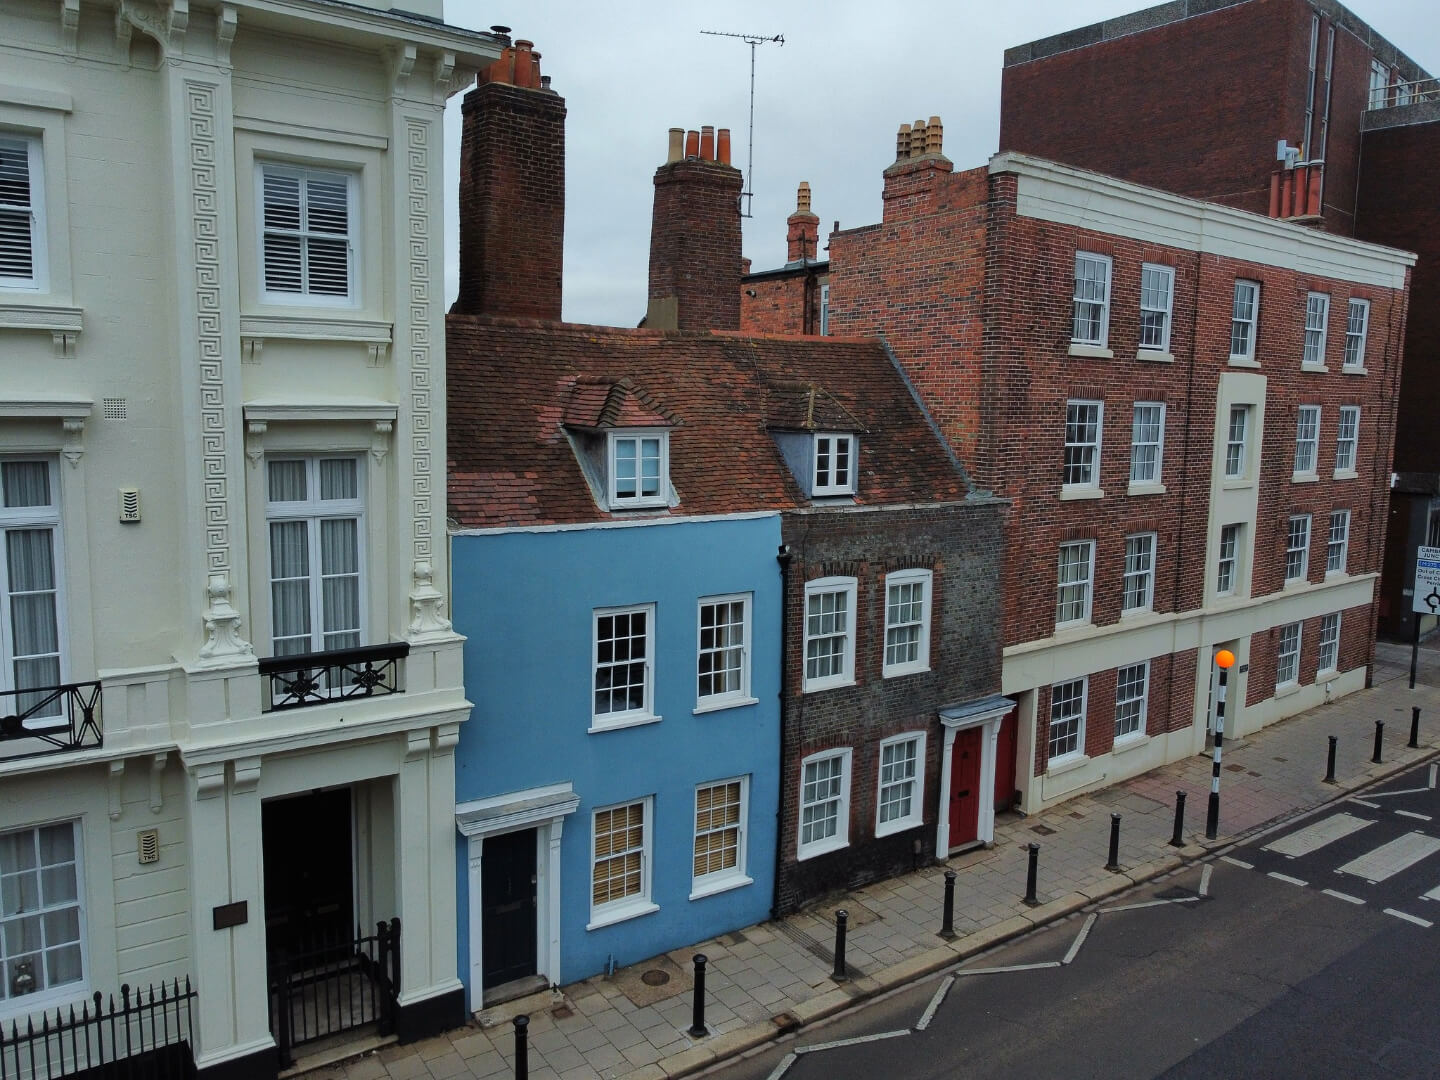 Student Accommodation in Old Portsmouth, Portsmouth - High Street and Braganza House